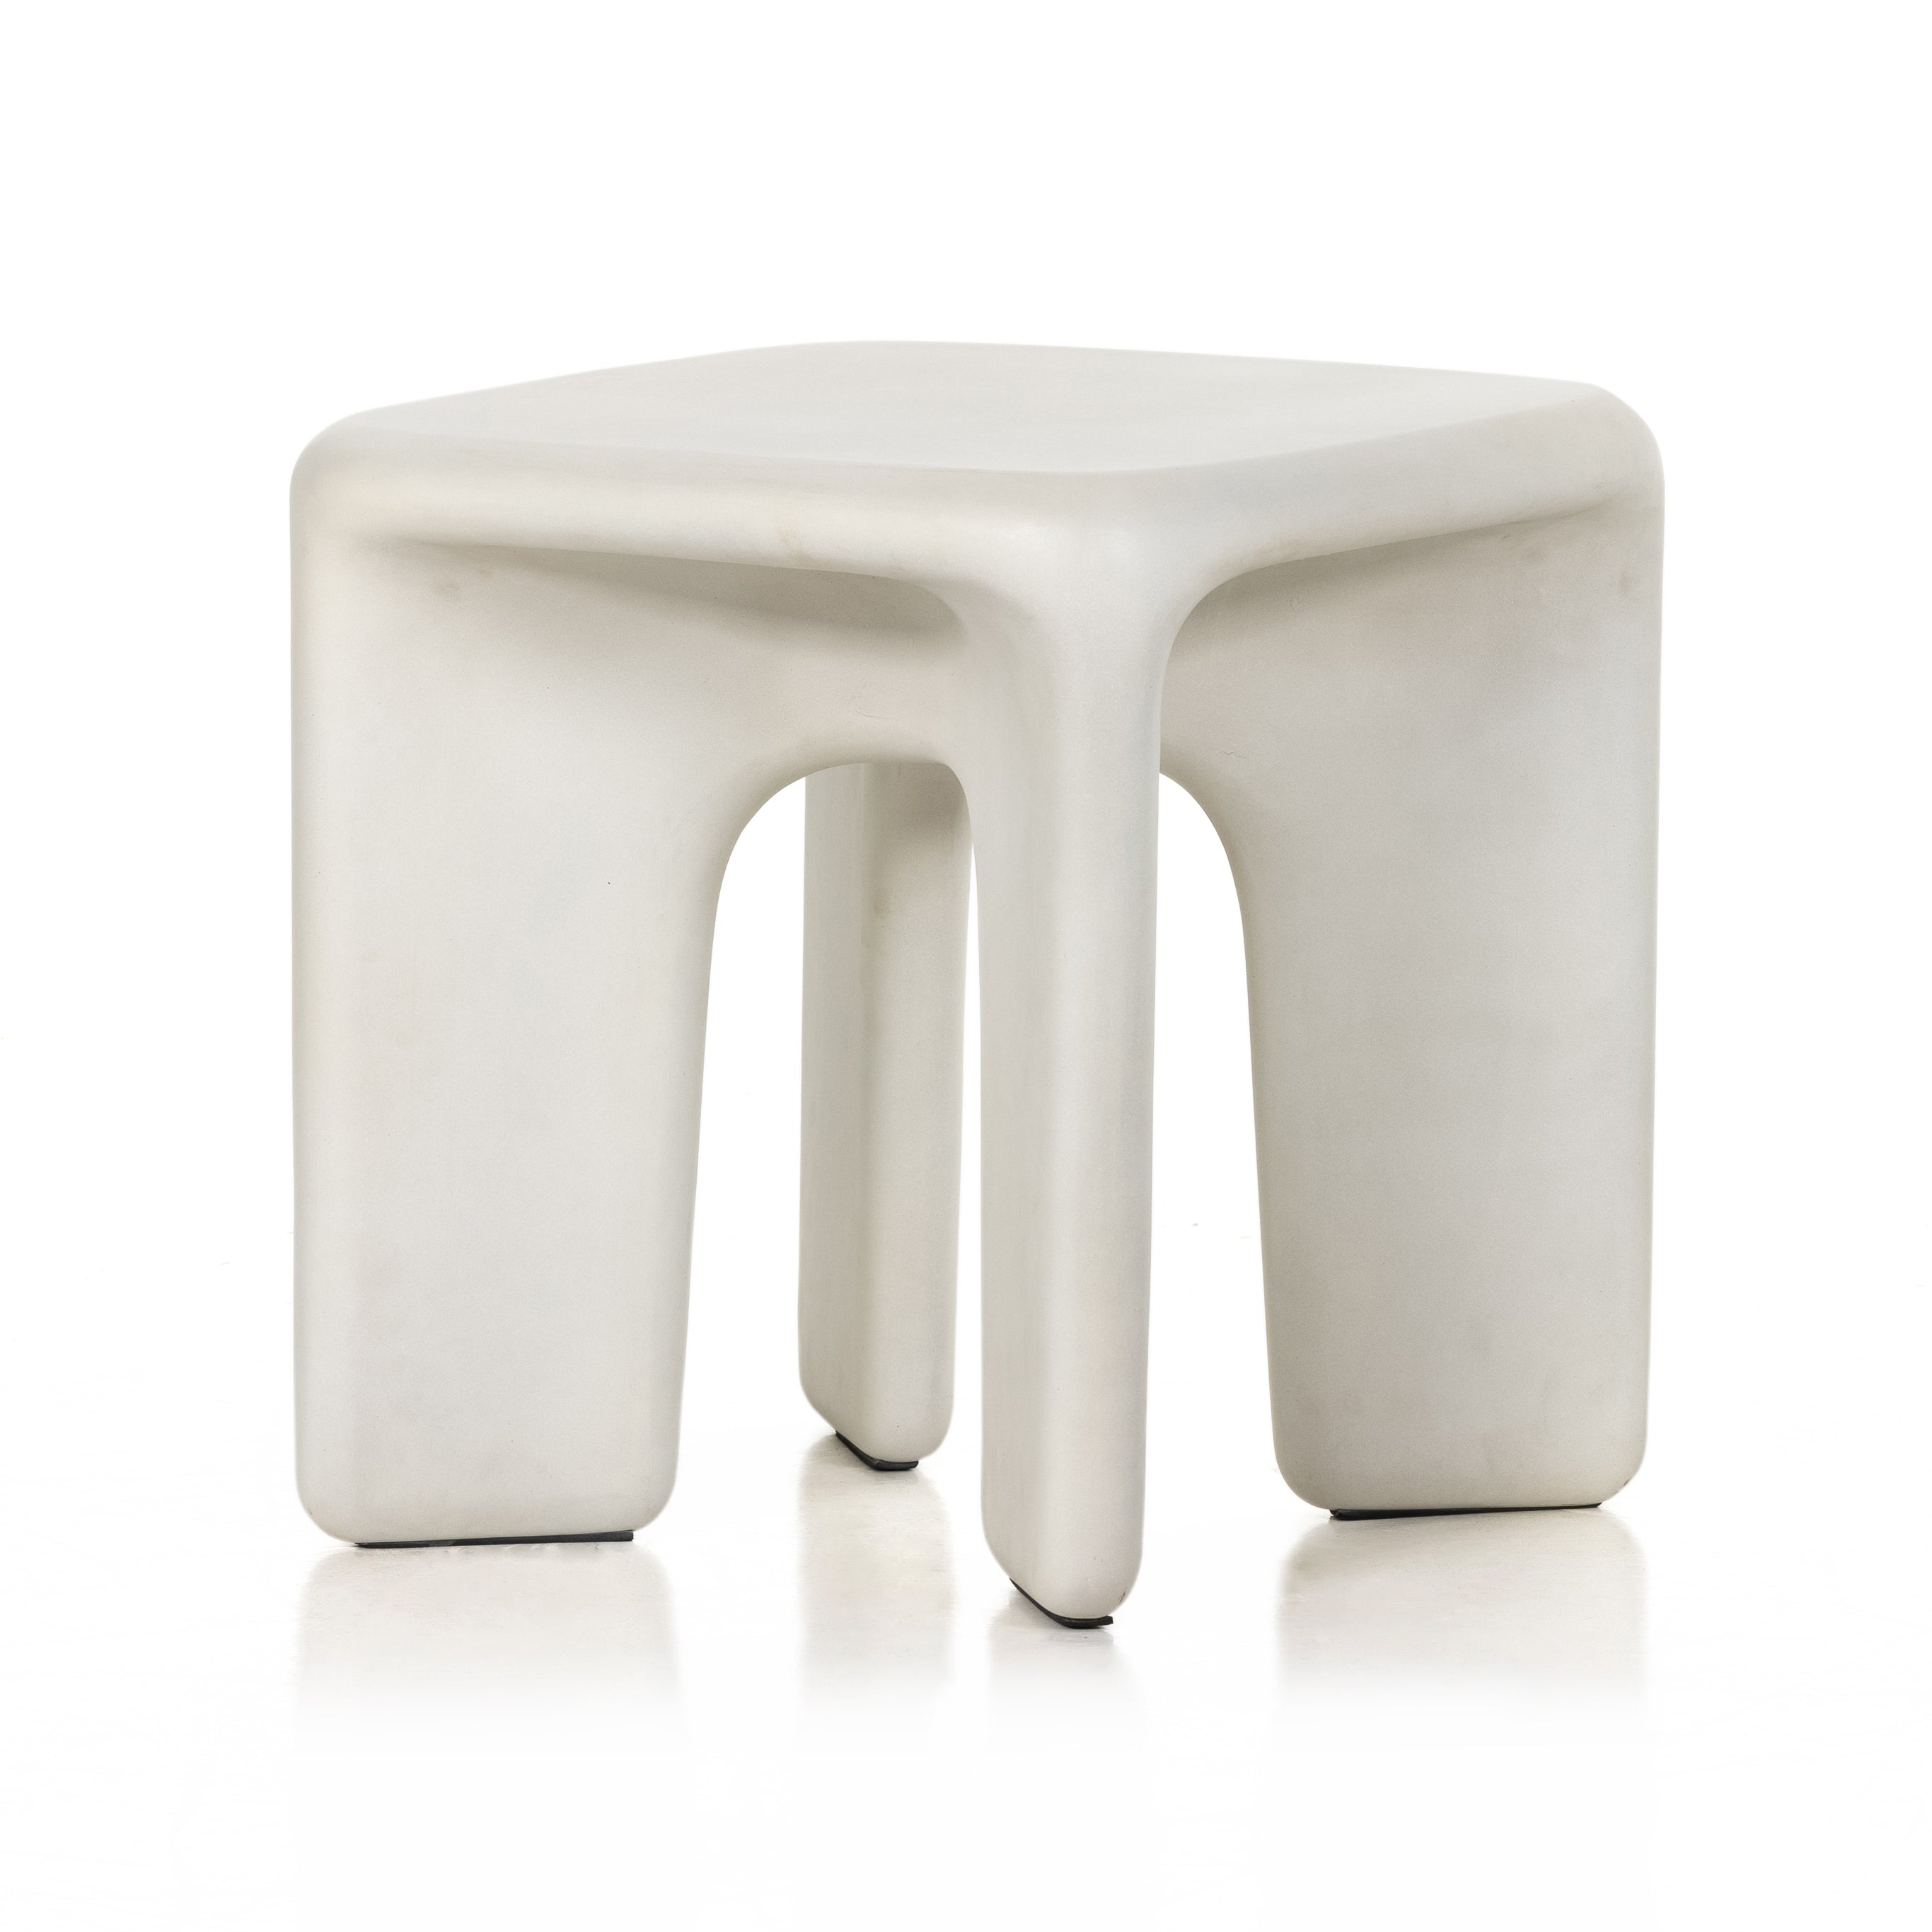 A minimalist dream, this Dante End Table - White Concrete is made from white-finished cast concrete with soft, chunky proportions. This would elevate the space for any living room or lounge area.    Overall Dimensions: 19.00"w x 19.00"d x 19.00"h